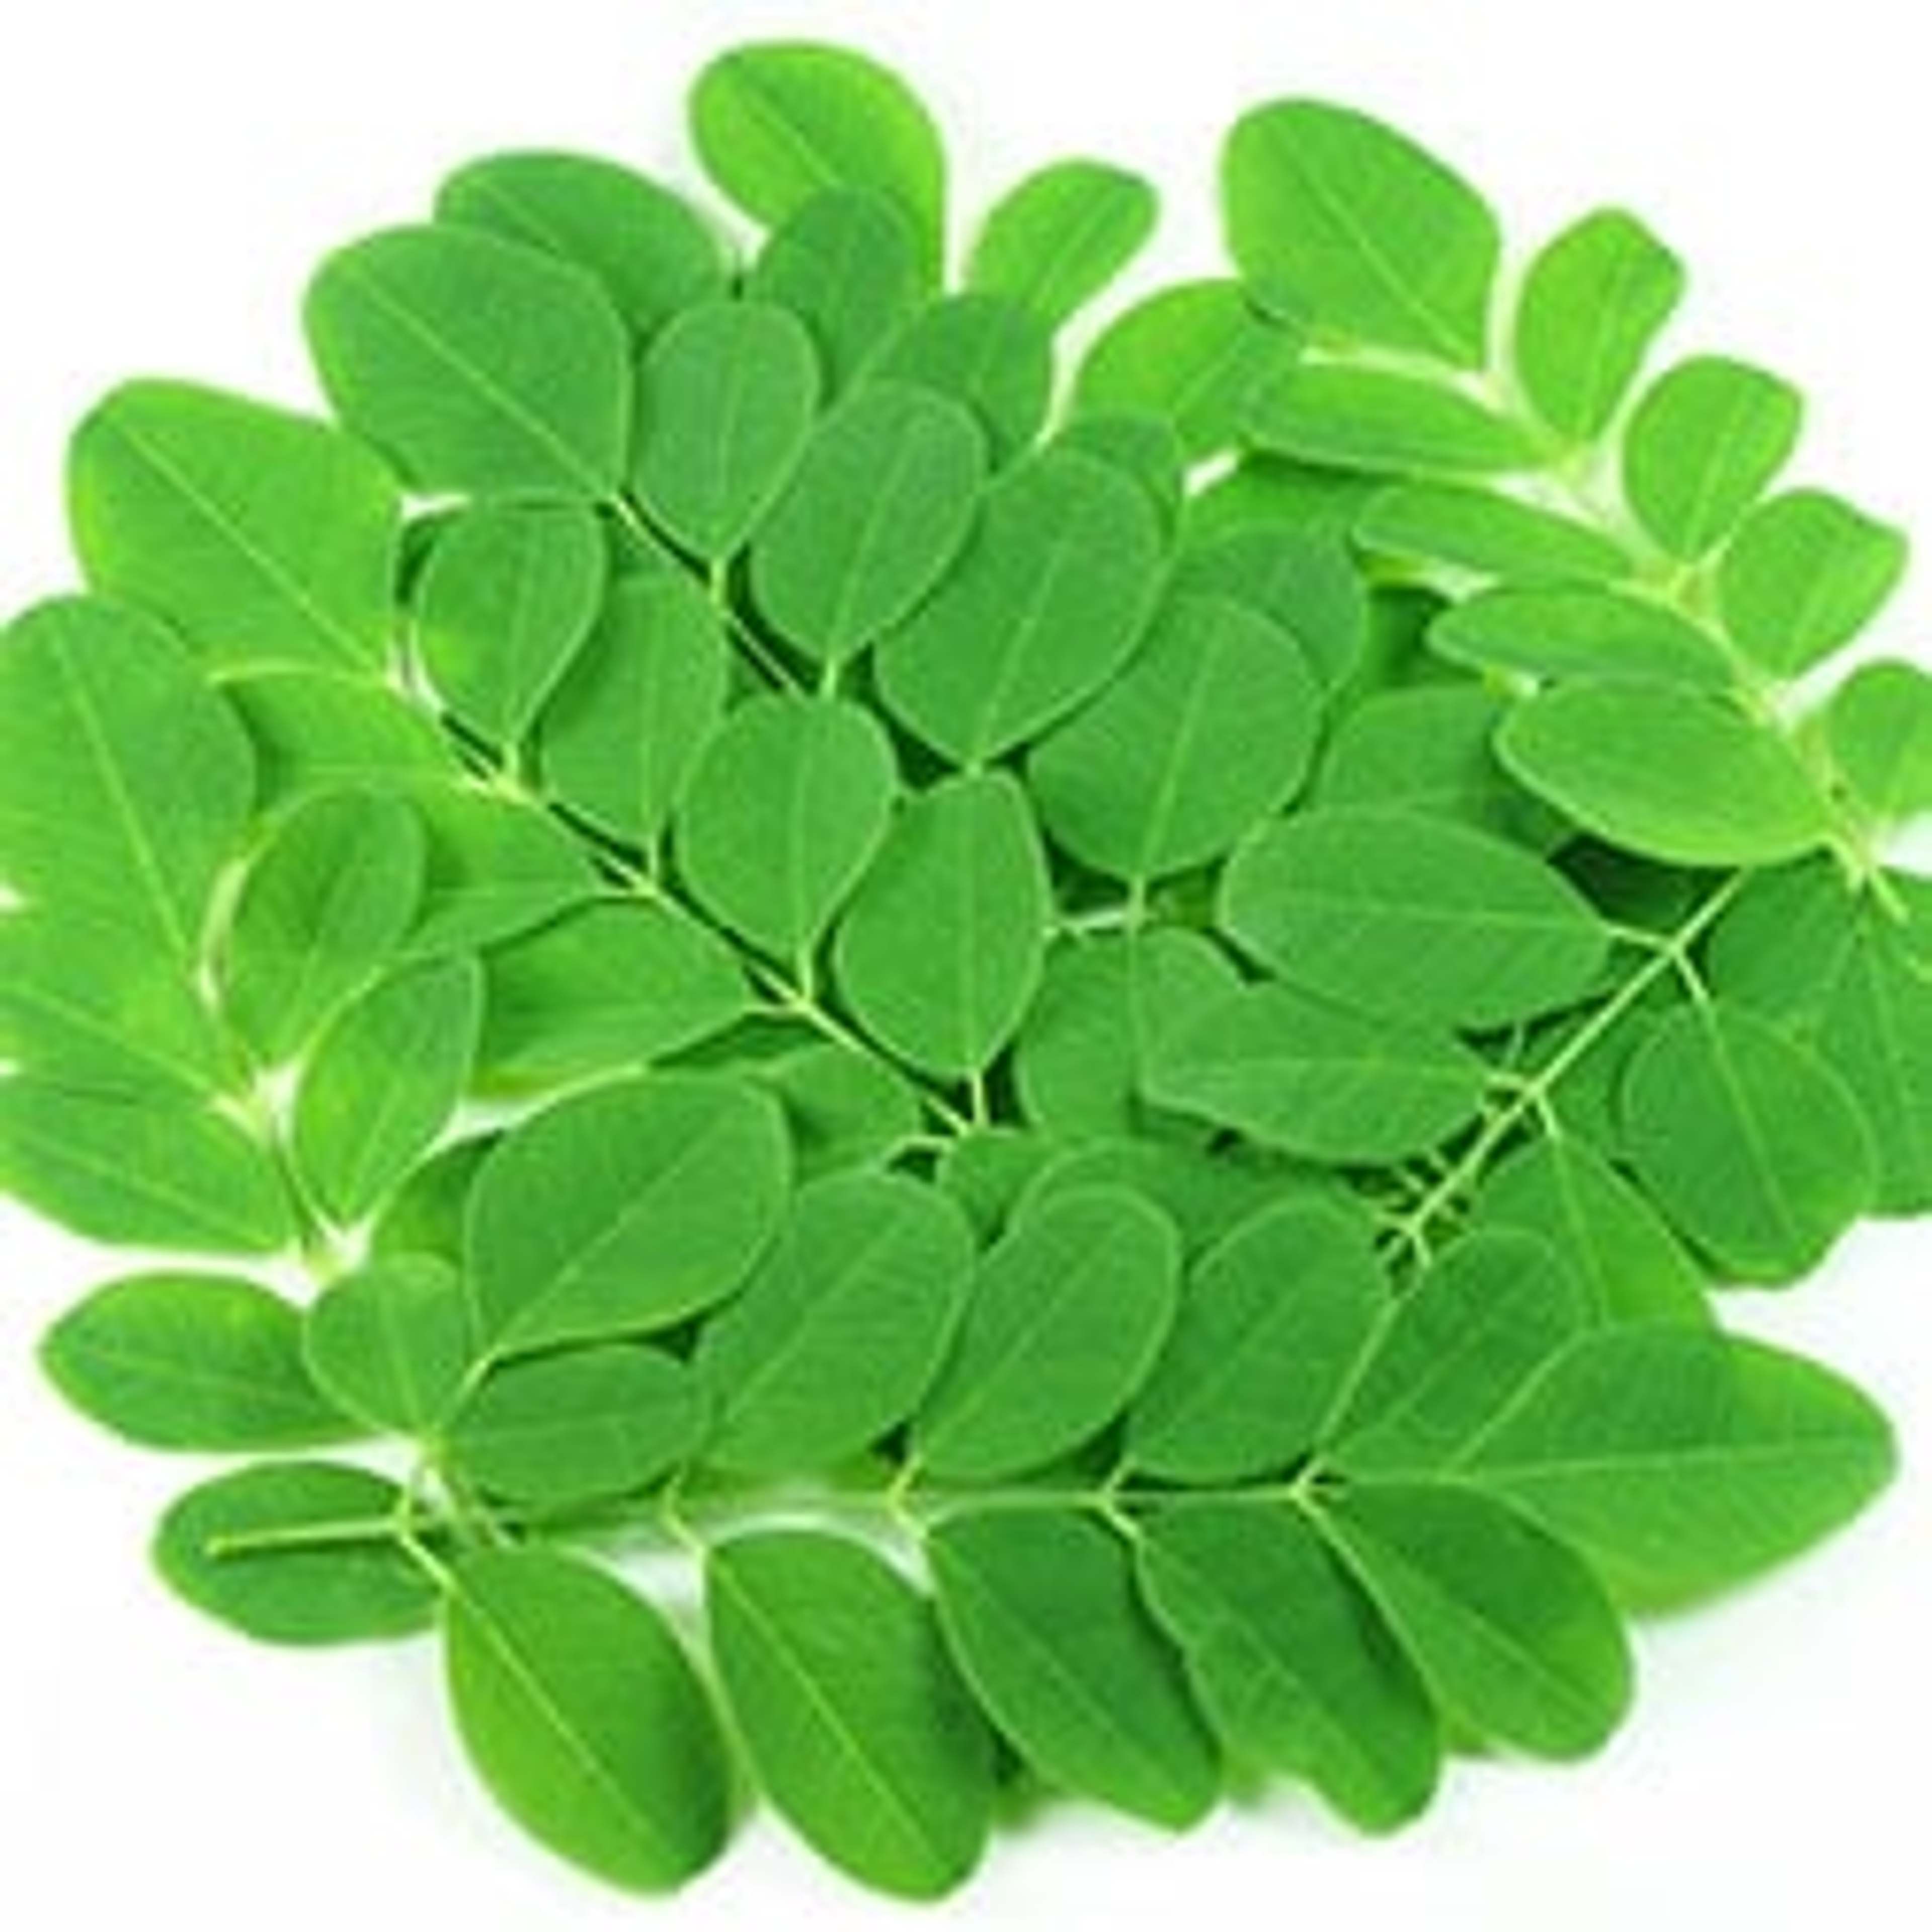 Moringa - From miracle tree to superfood